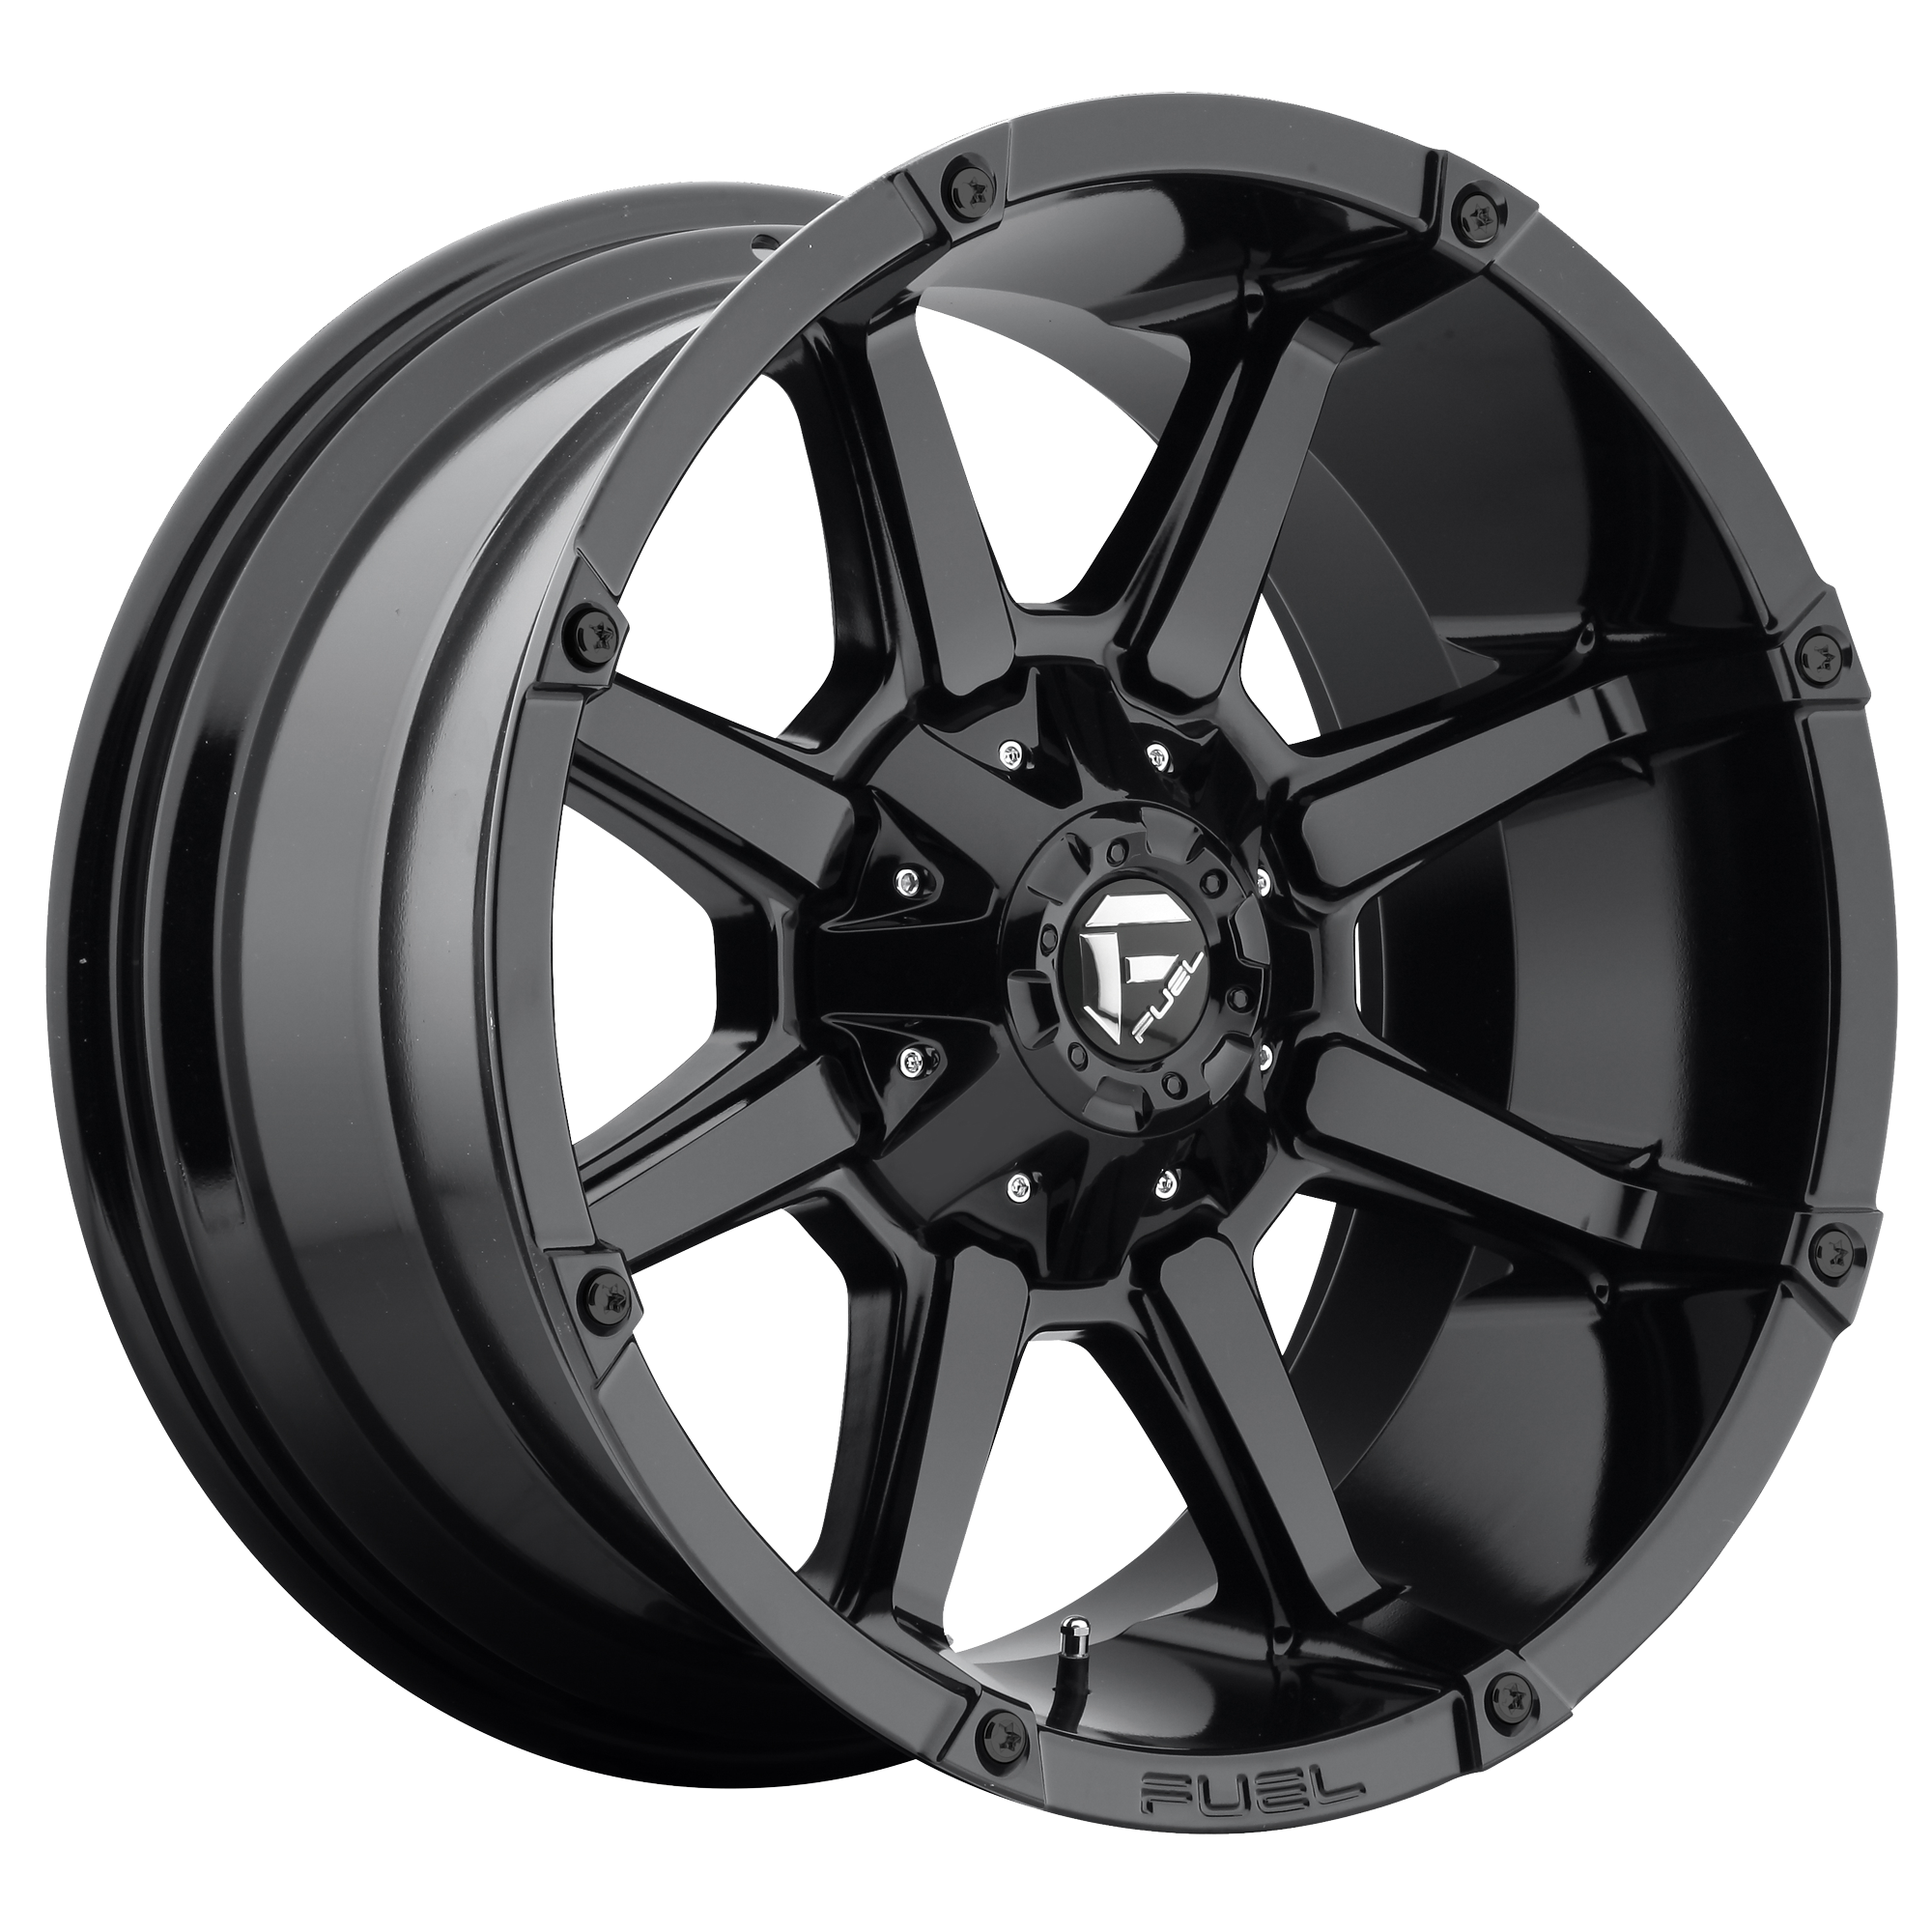 COUPLER 17x9 5x114.30/5x127.00 GLOSS BLACK (-12 mm) - Tires and Engine Performance